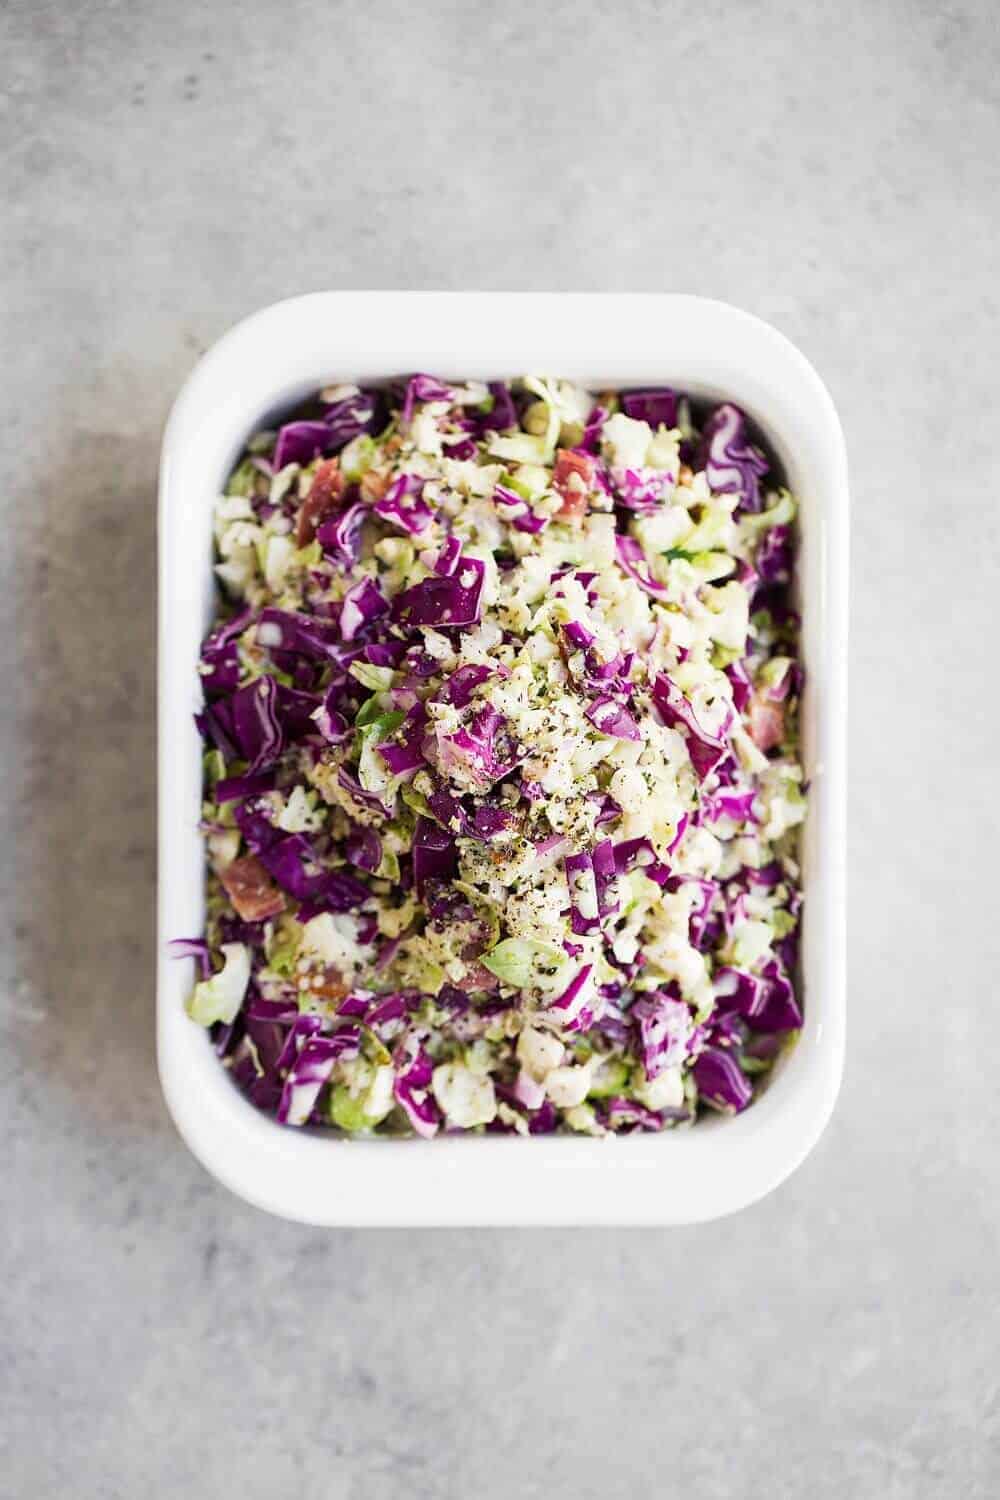 Whole30 Brussels Sprout Slaw recipe. The BEST brussels sprout slaw made with bacon, cabbage and hemp seeds! Low carb paleo brussels sprout slaw. Low carb side dishes. Whole30 side dishes. Best whole30 recipes. Whole30 Brussels and bacon. Brussels sprout bacon recipe. Low carb brussel sprout recipes. Healthy brussel sprout salad. Whole30 lunch recipes.